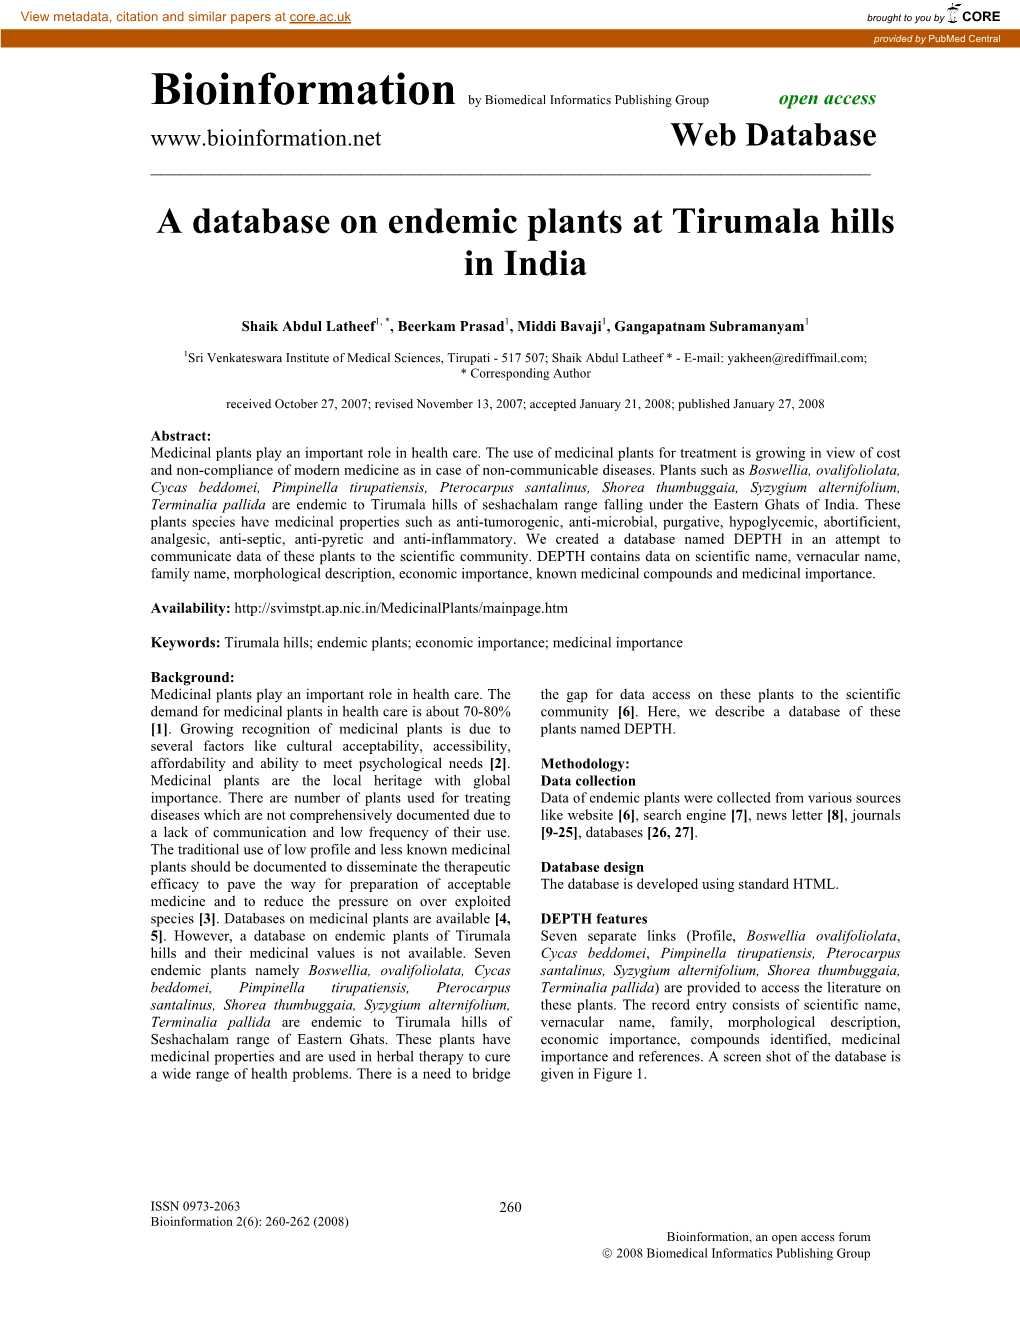 A Database on Endemic Plants at Tirumala Hills in India